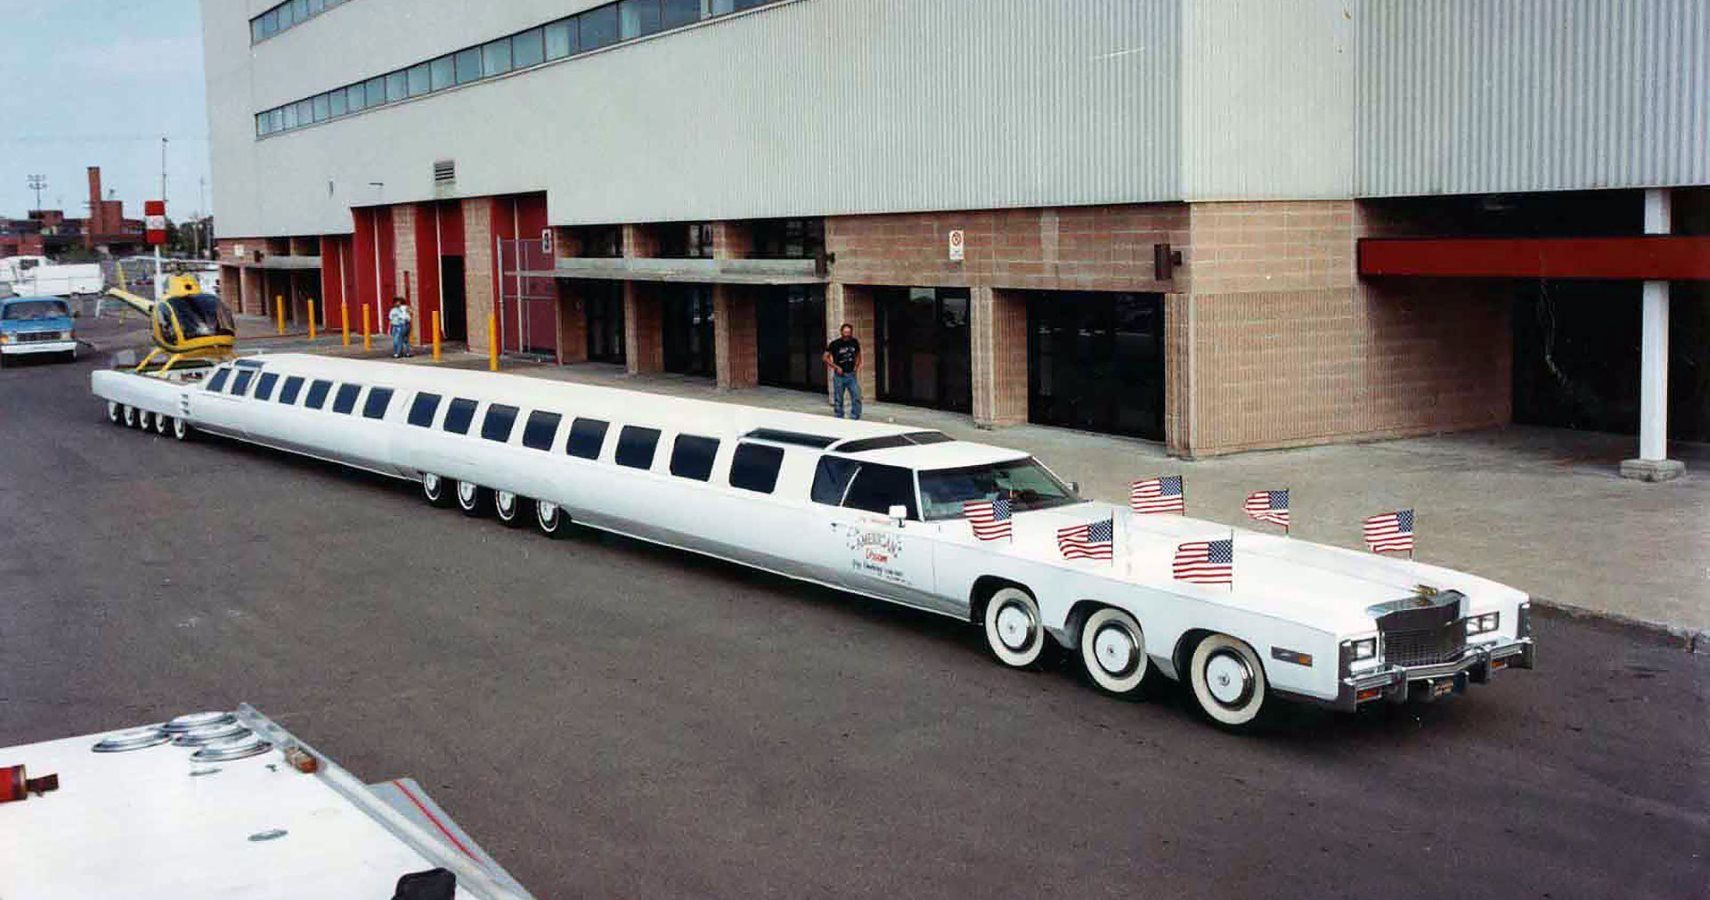 Check Out The World's Longest Car